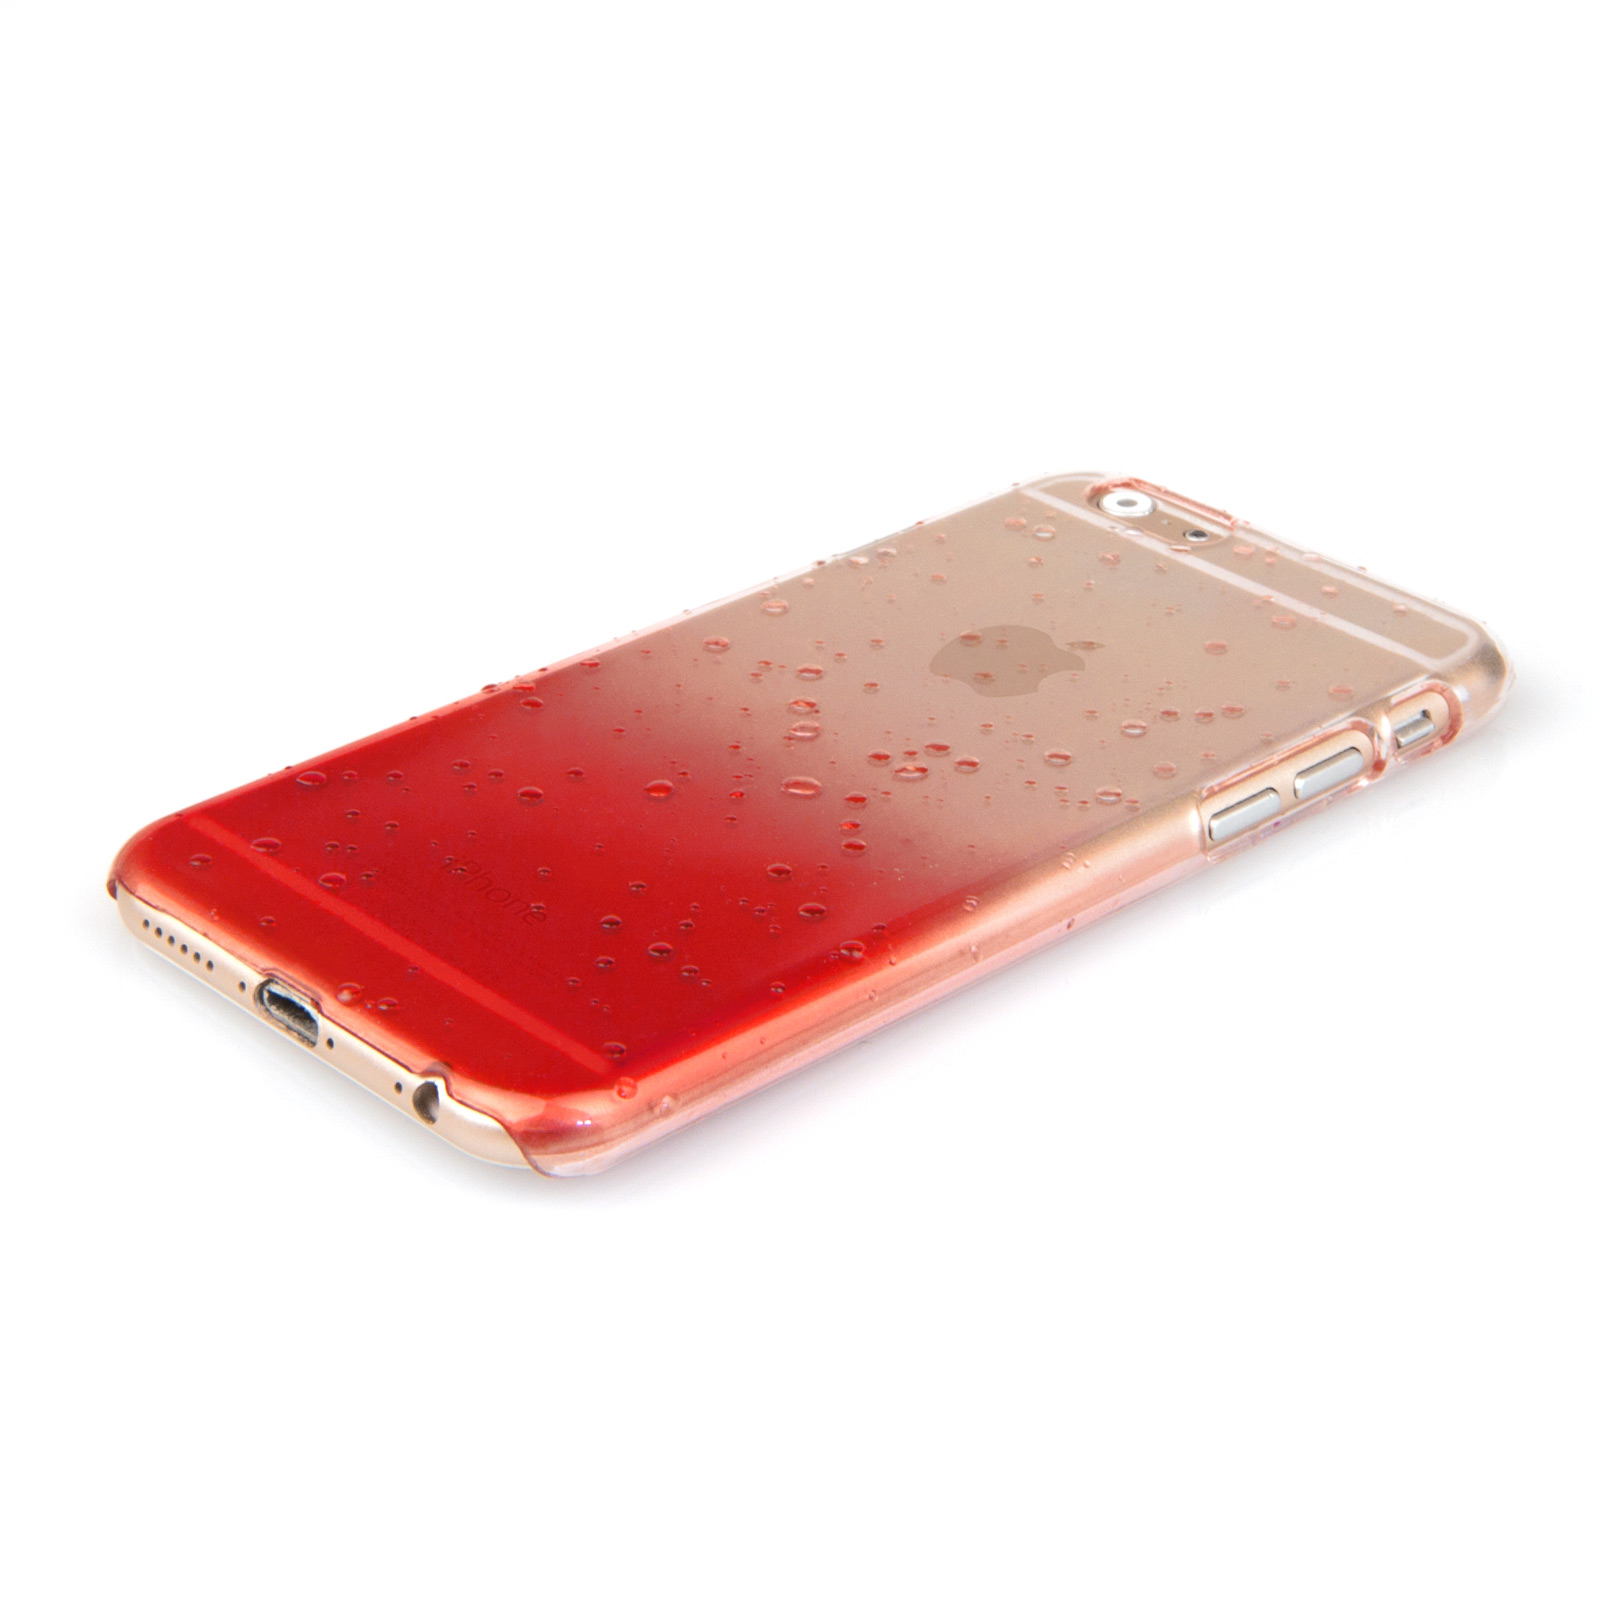 YouSave Accessories iPhone 6 and 6s Raindrop Hard Case - Red-Clear